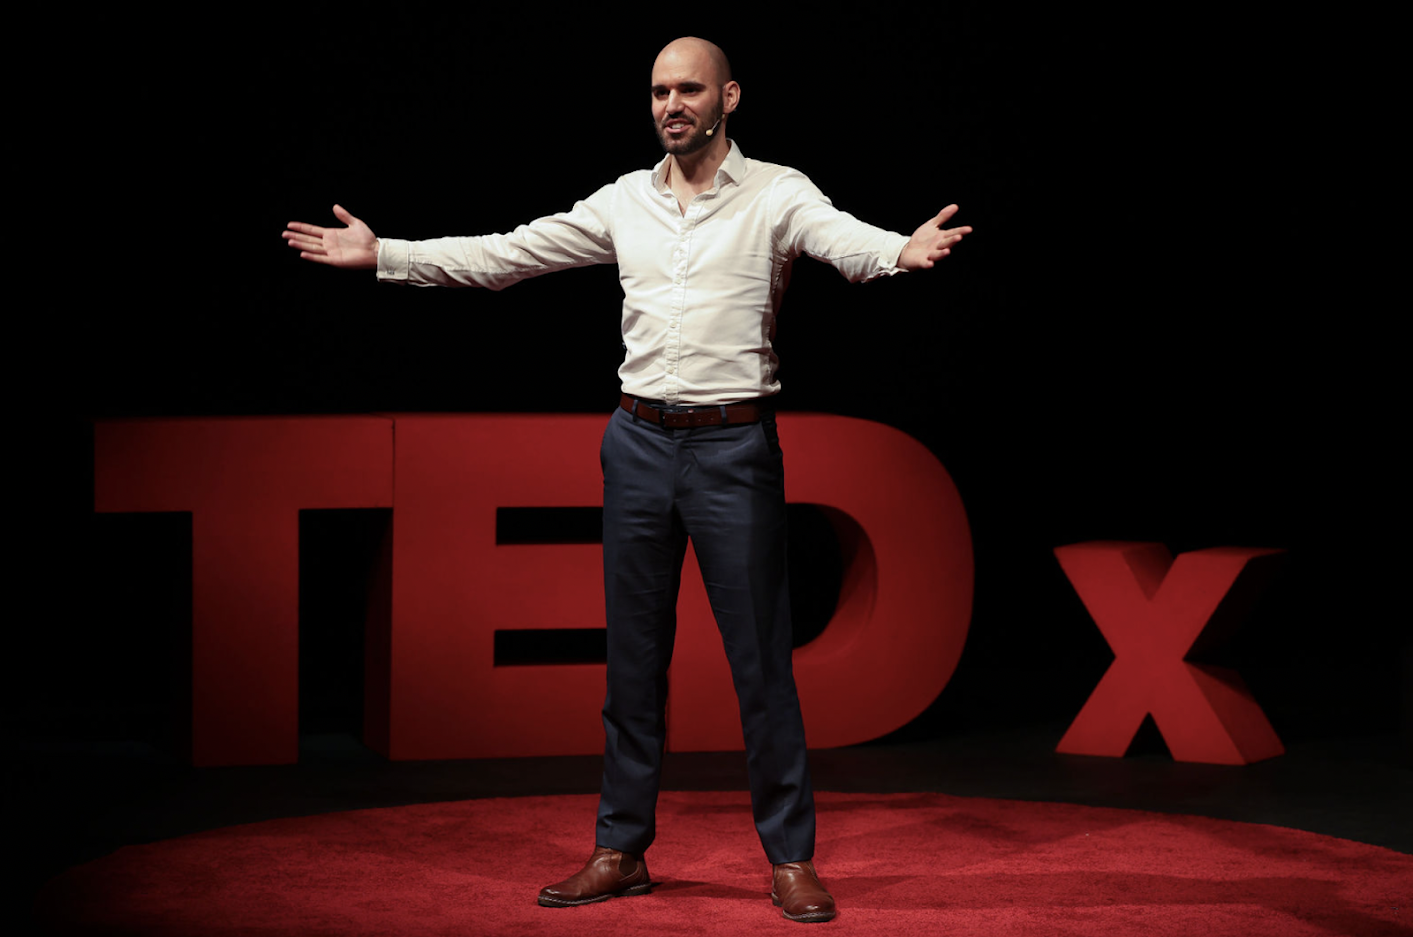 Men's coach Ryan Park on stage at TEDX